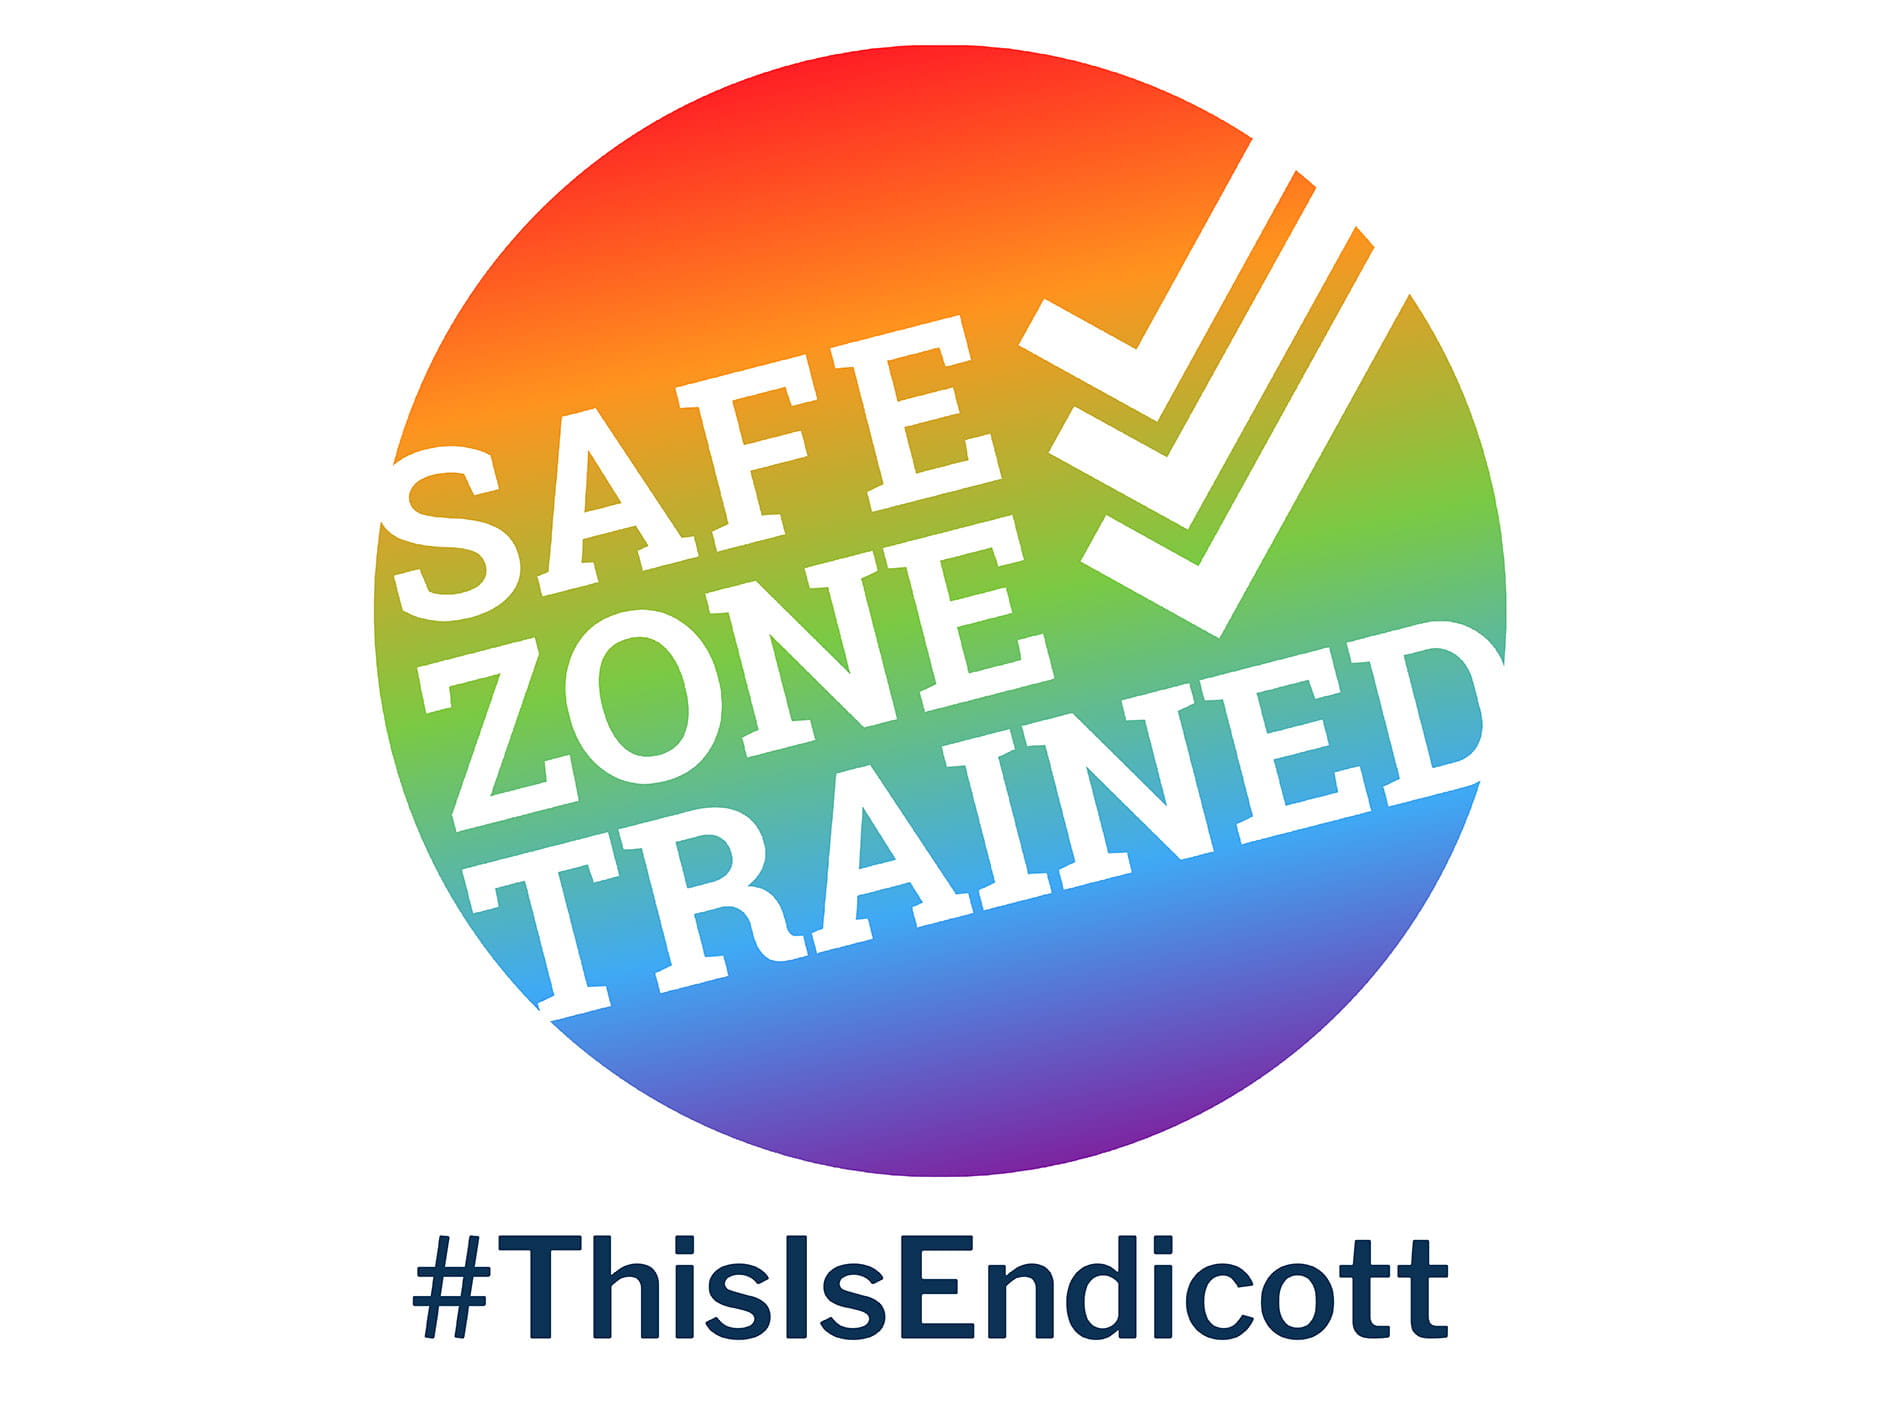 Safe Zone Trained Sticker and #ThisIsEndicott 